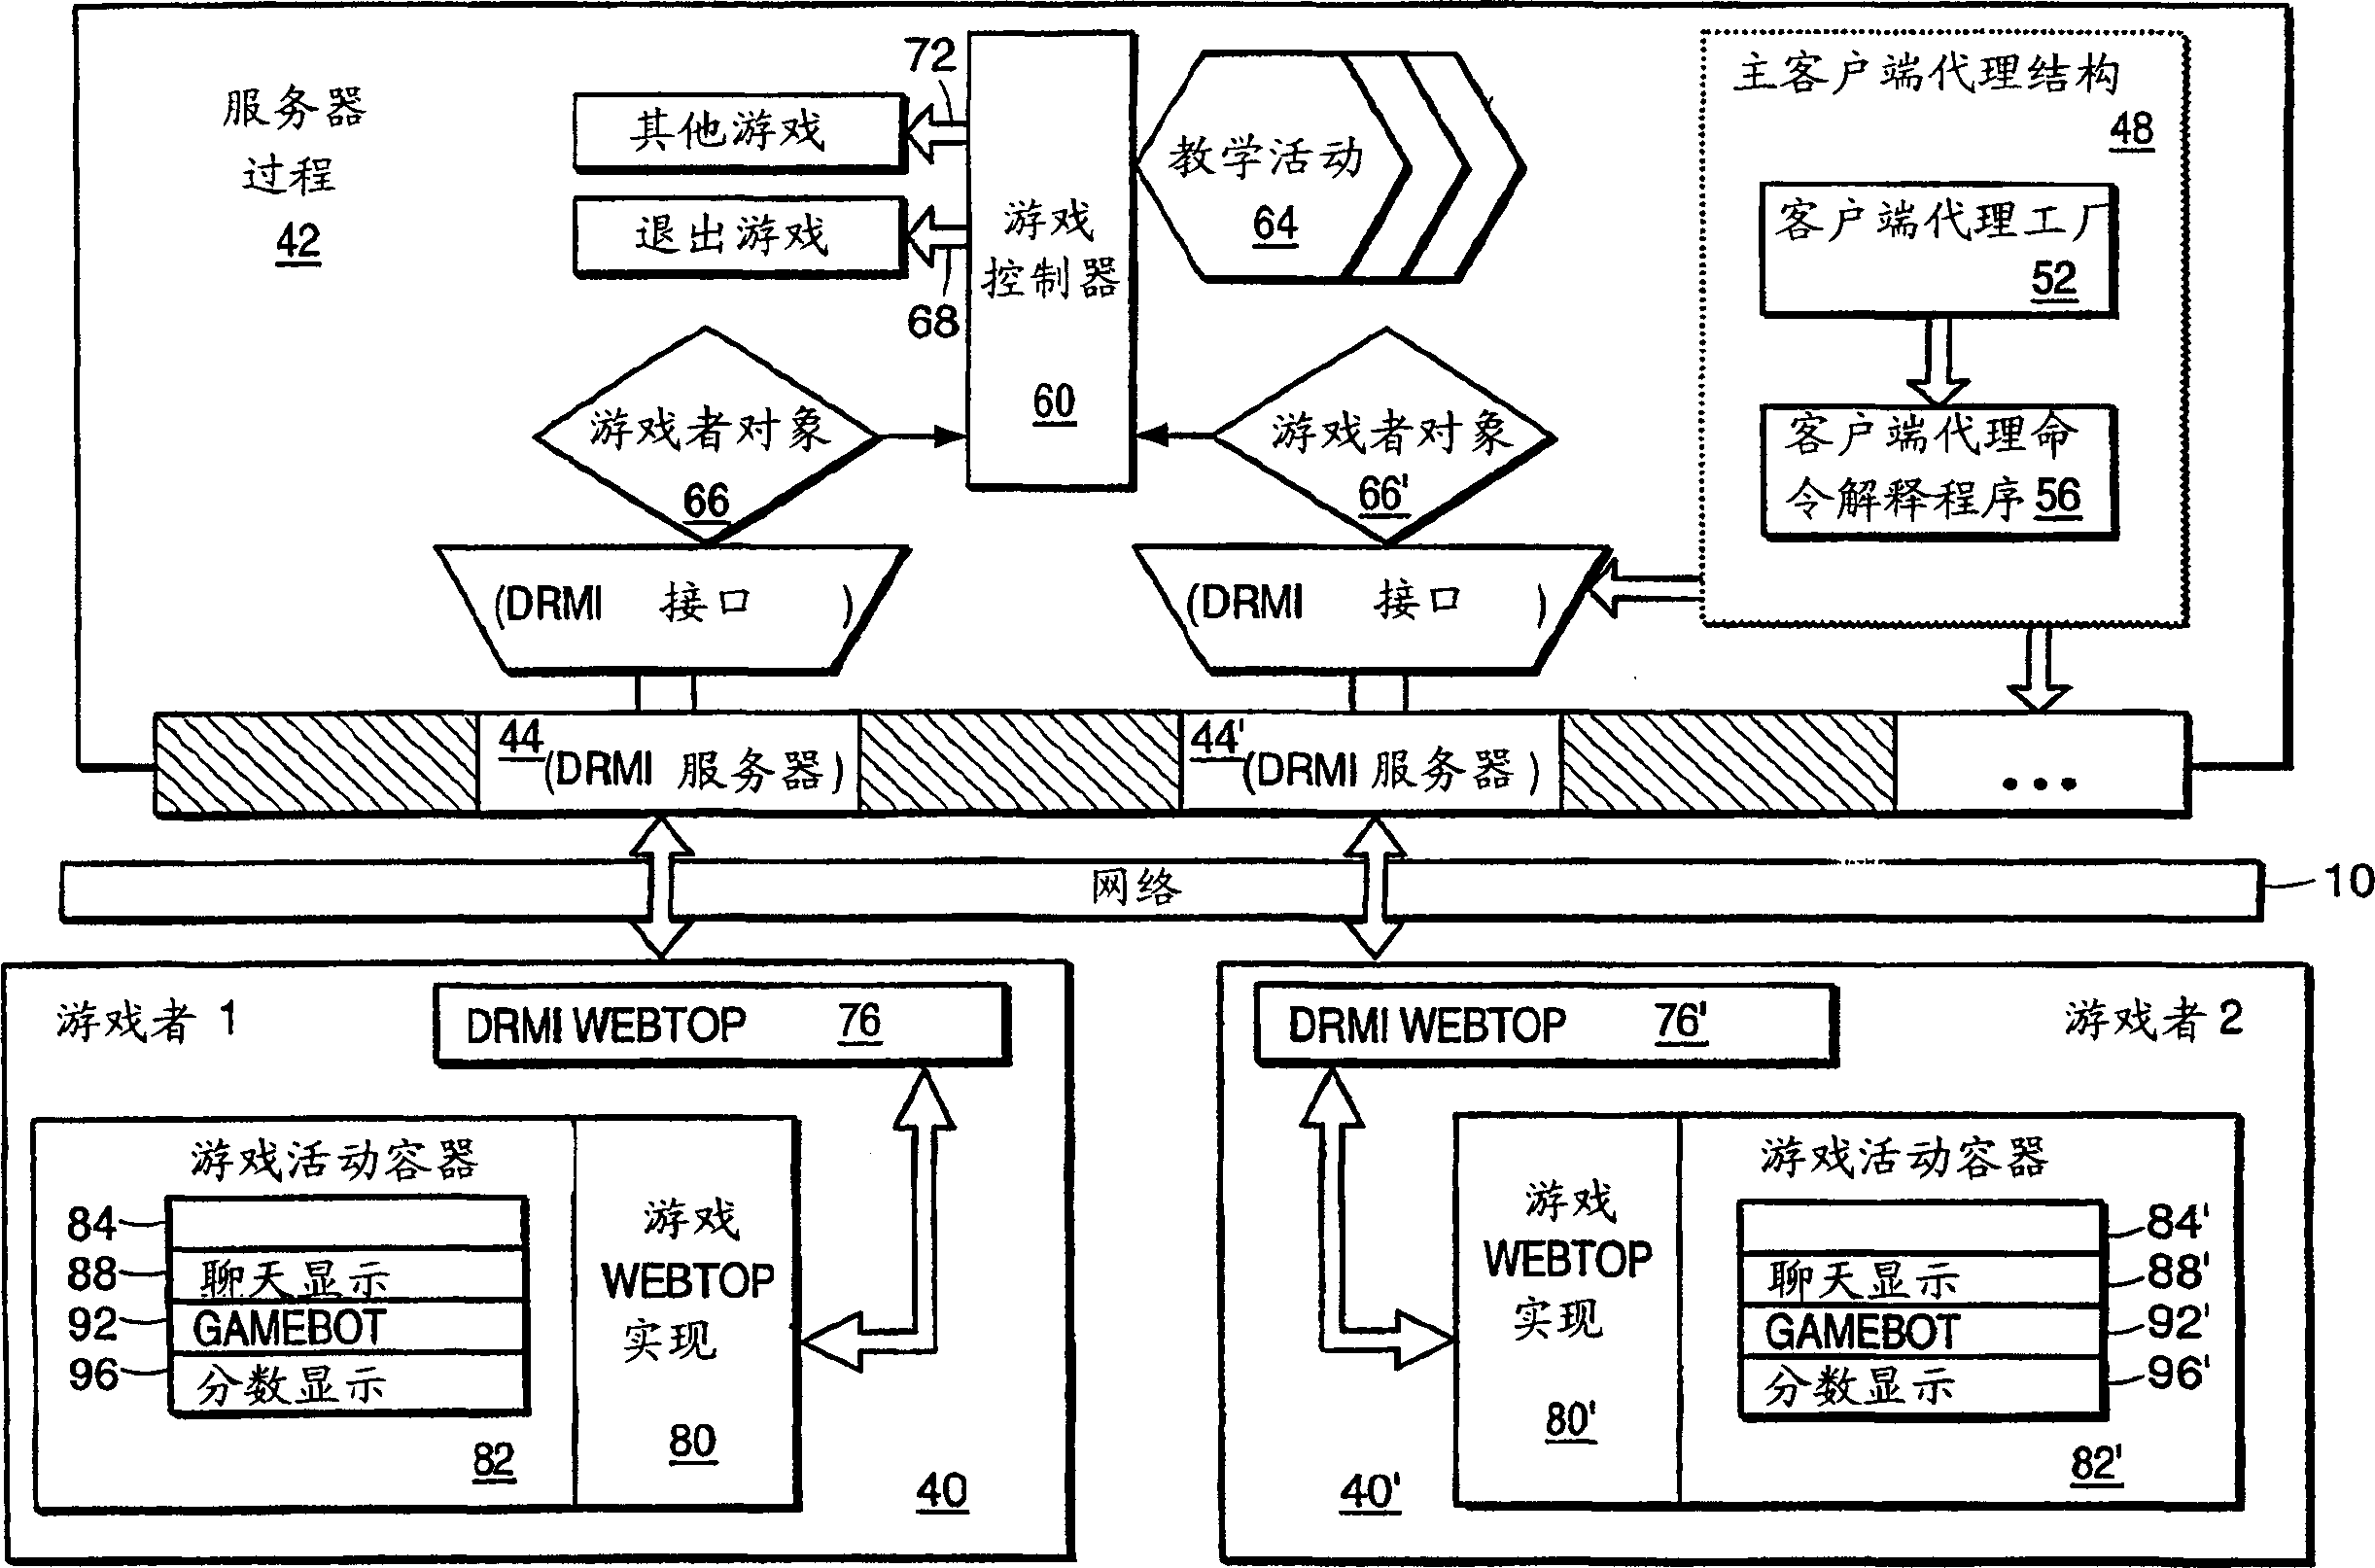 A learning activity platform and method for teaching a foreign language over a network